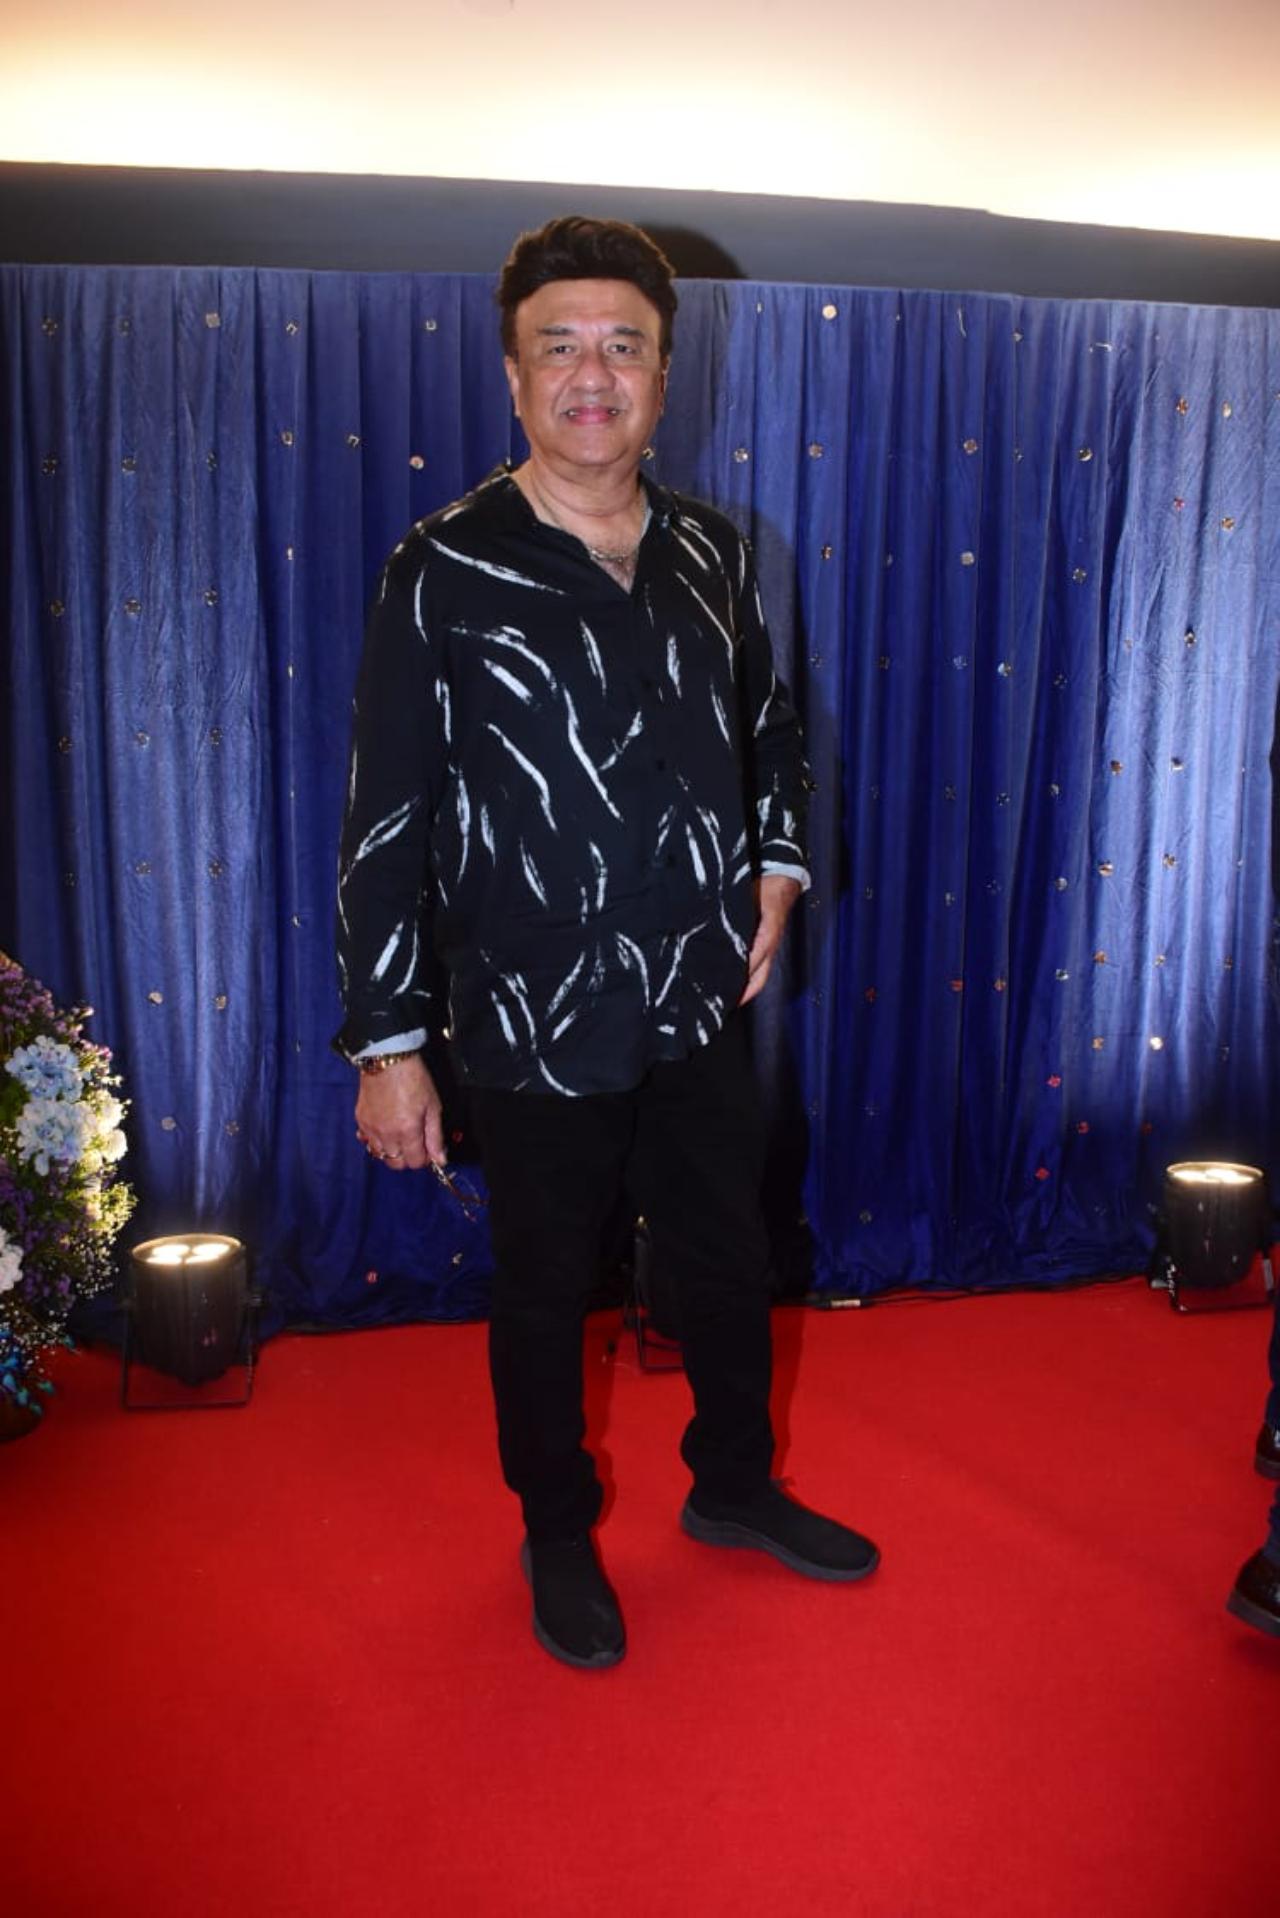 Anu Malik also attended Sonu Nigam's birthday bash - the two were also judges together in previous seasons of Indian Idol